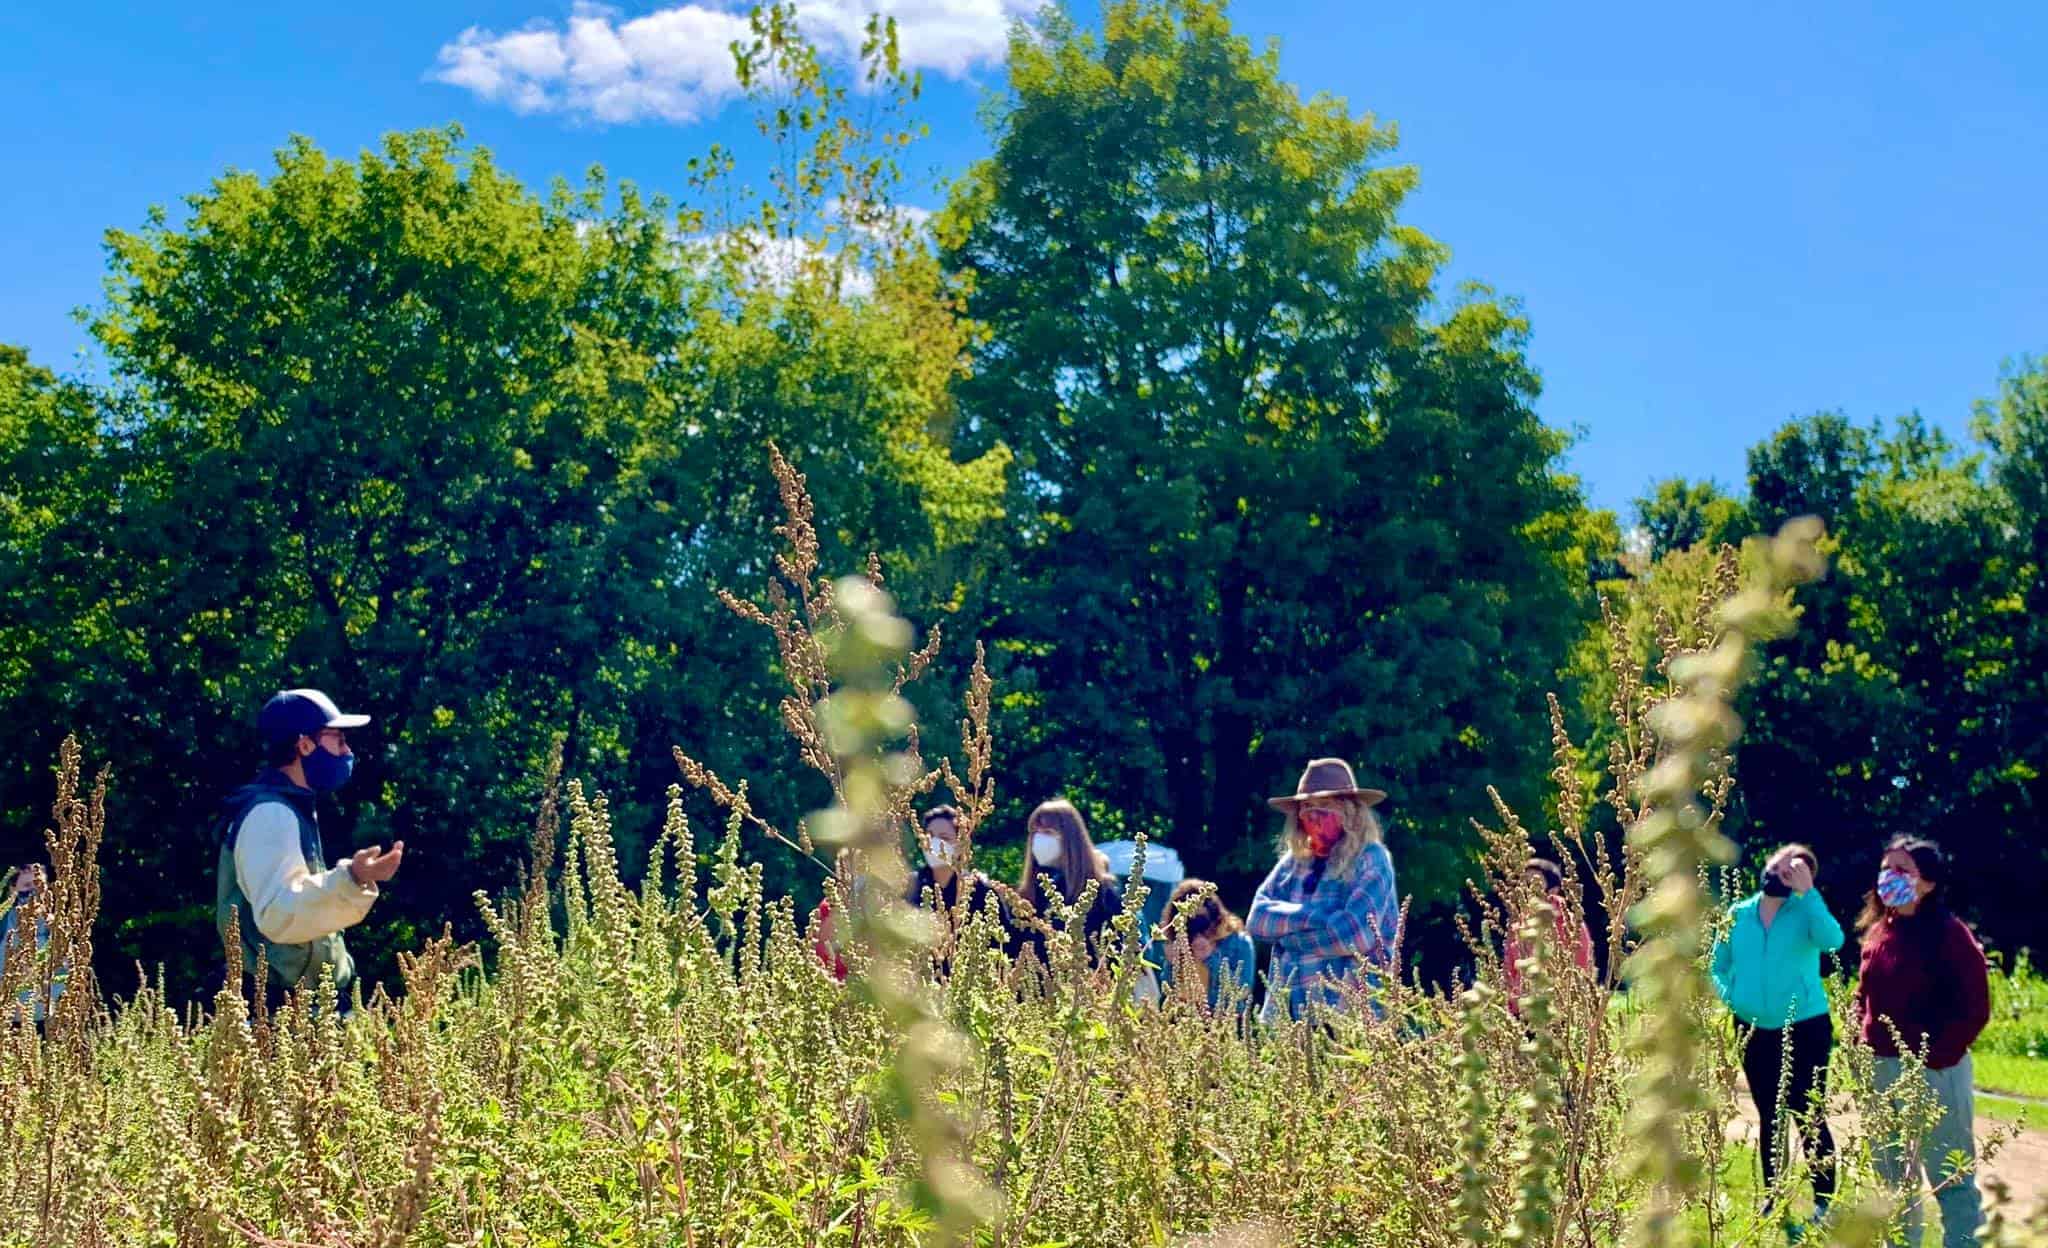 Staff and participants work the fields at Salt City Harvest Farm on a sunny day, with tall grasses growing in the foreground.